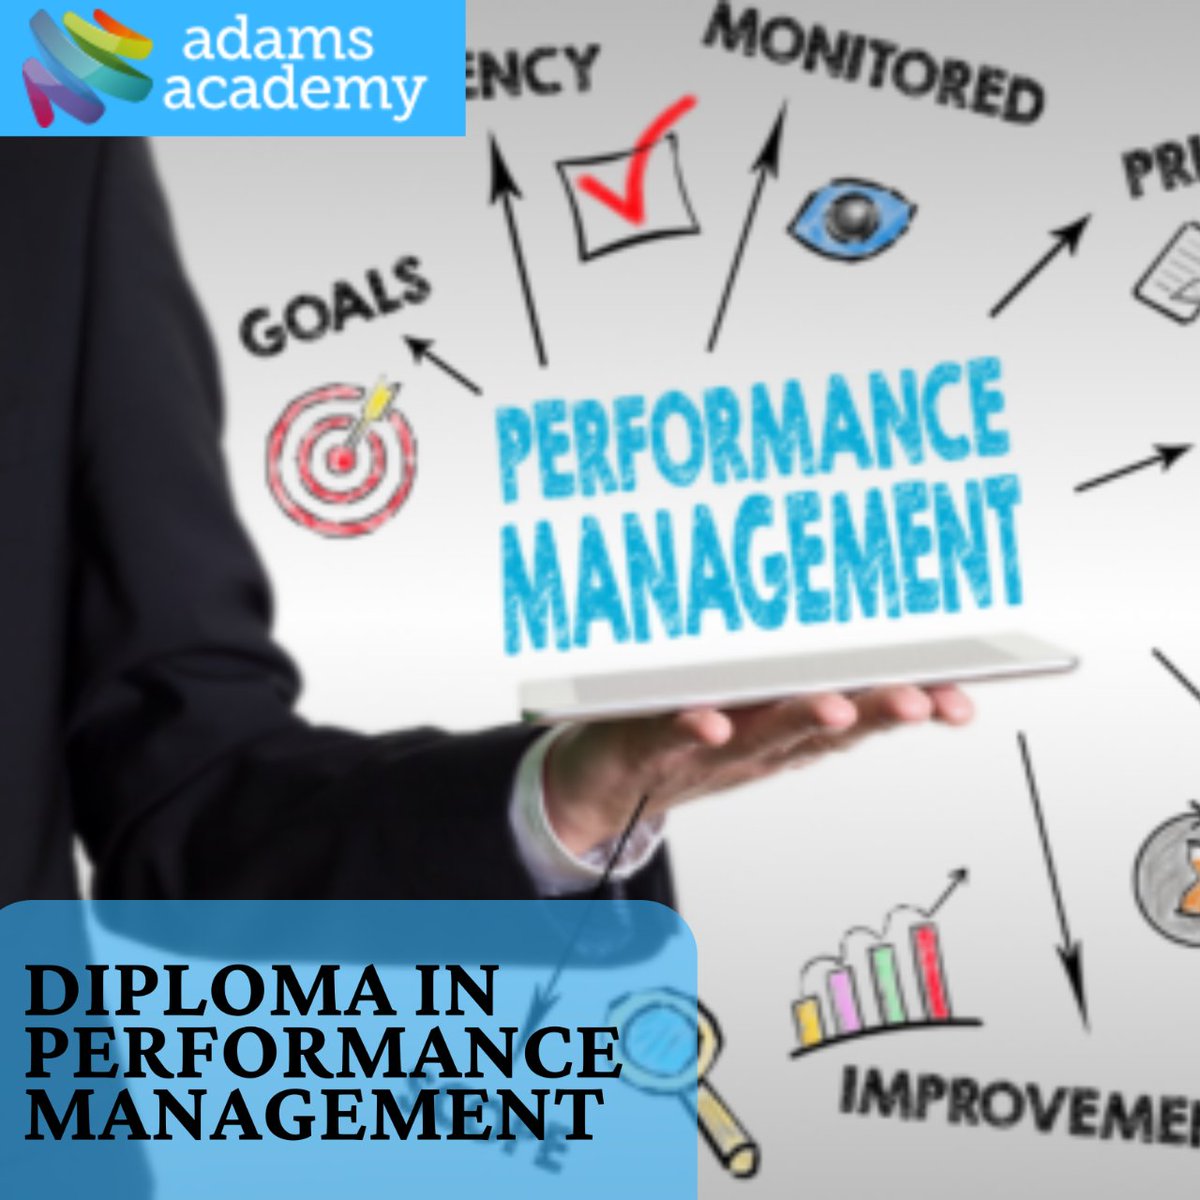 Unlock Your Team's Full Potential with Adams Academy's Diploma in Performance Management. Drive Success, Set Goals, and Achieve More!
#PerformanceManagement #AdamsAcademy #LeadershipSkills #GoalSetting